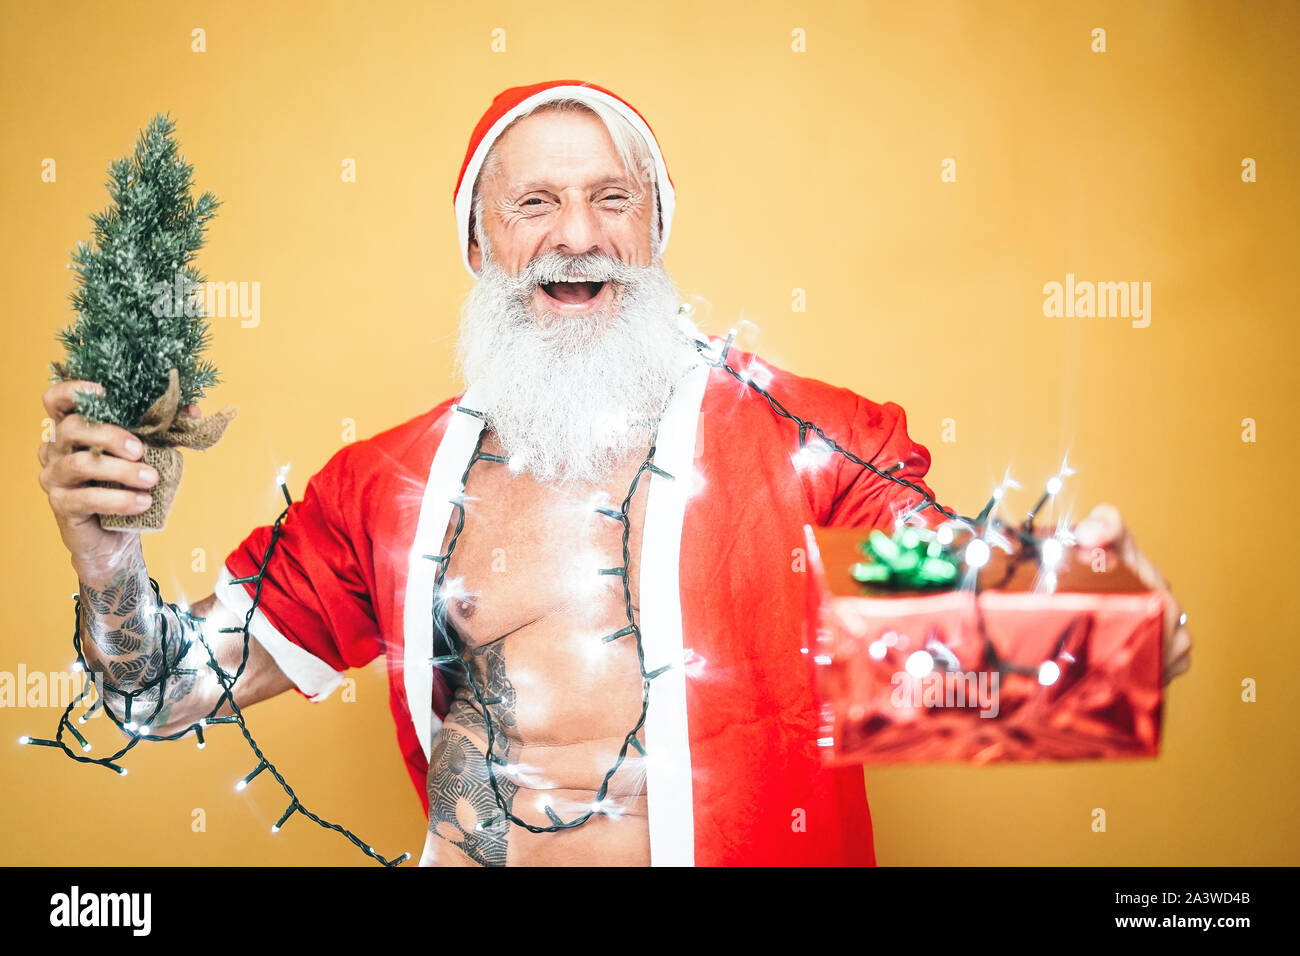 Happy tattoo hipster santa claus equiped with white lights giving christmas gifts - Trendy beard senior wearing xmas clothes and holding presents Stock Photo